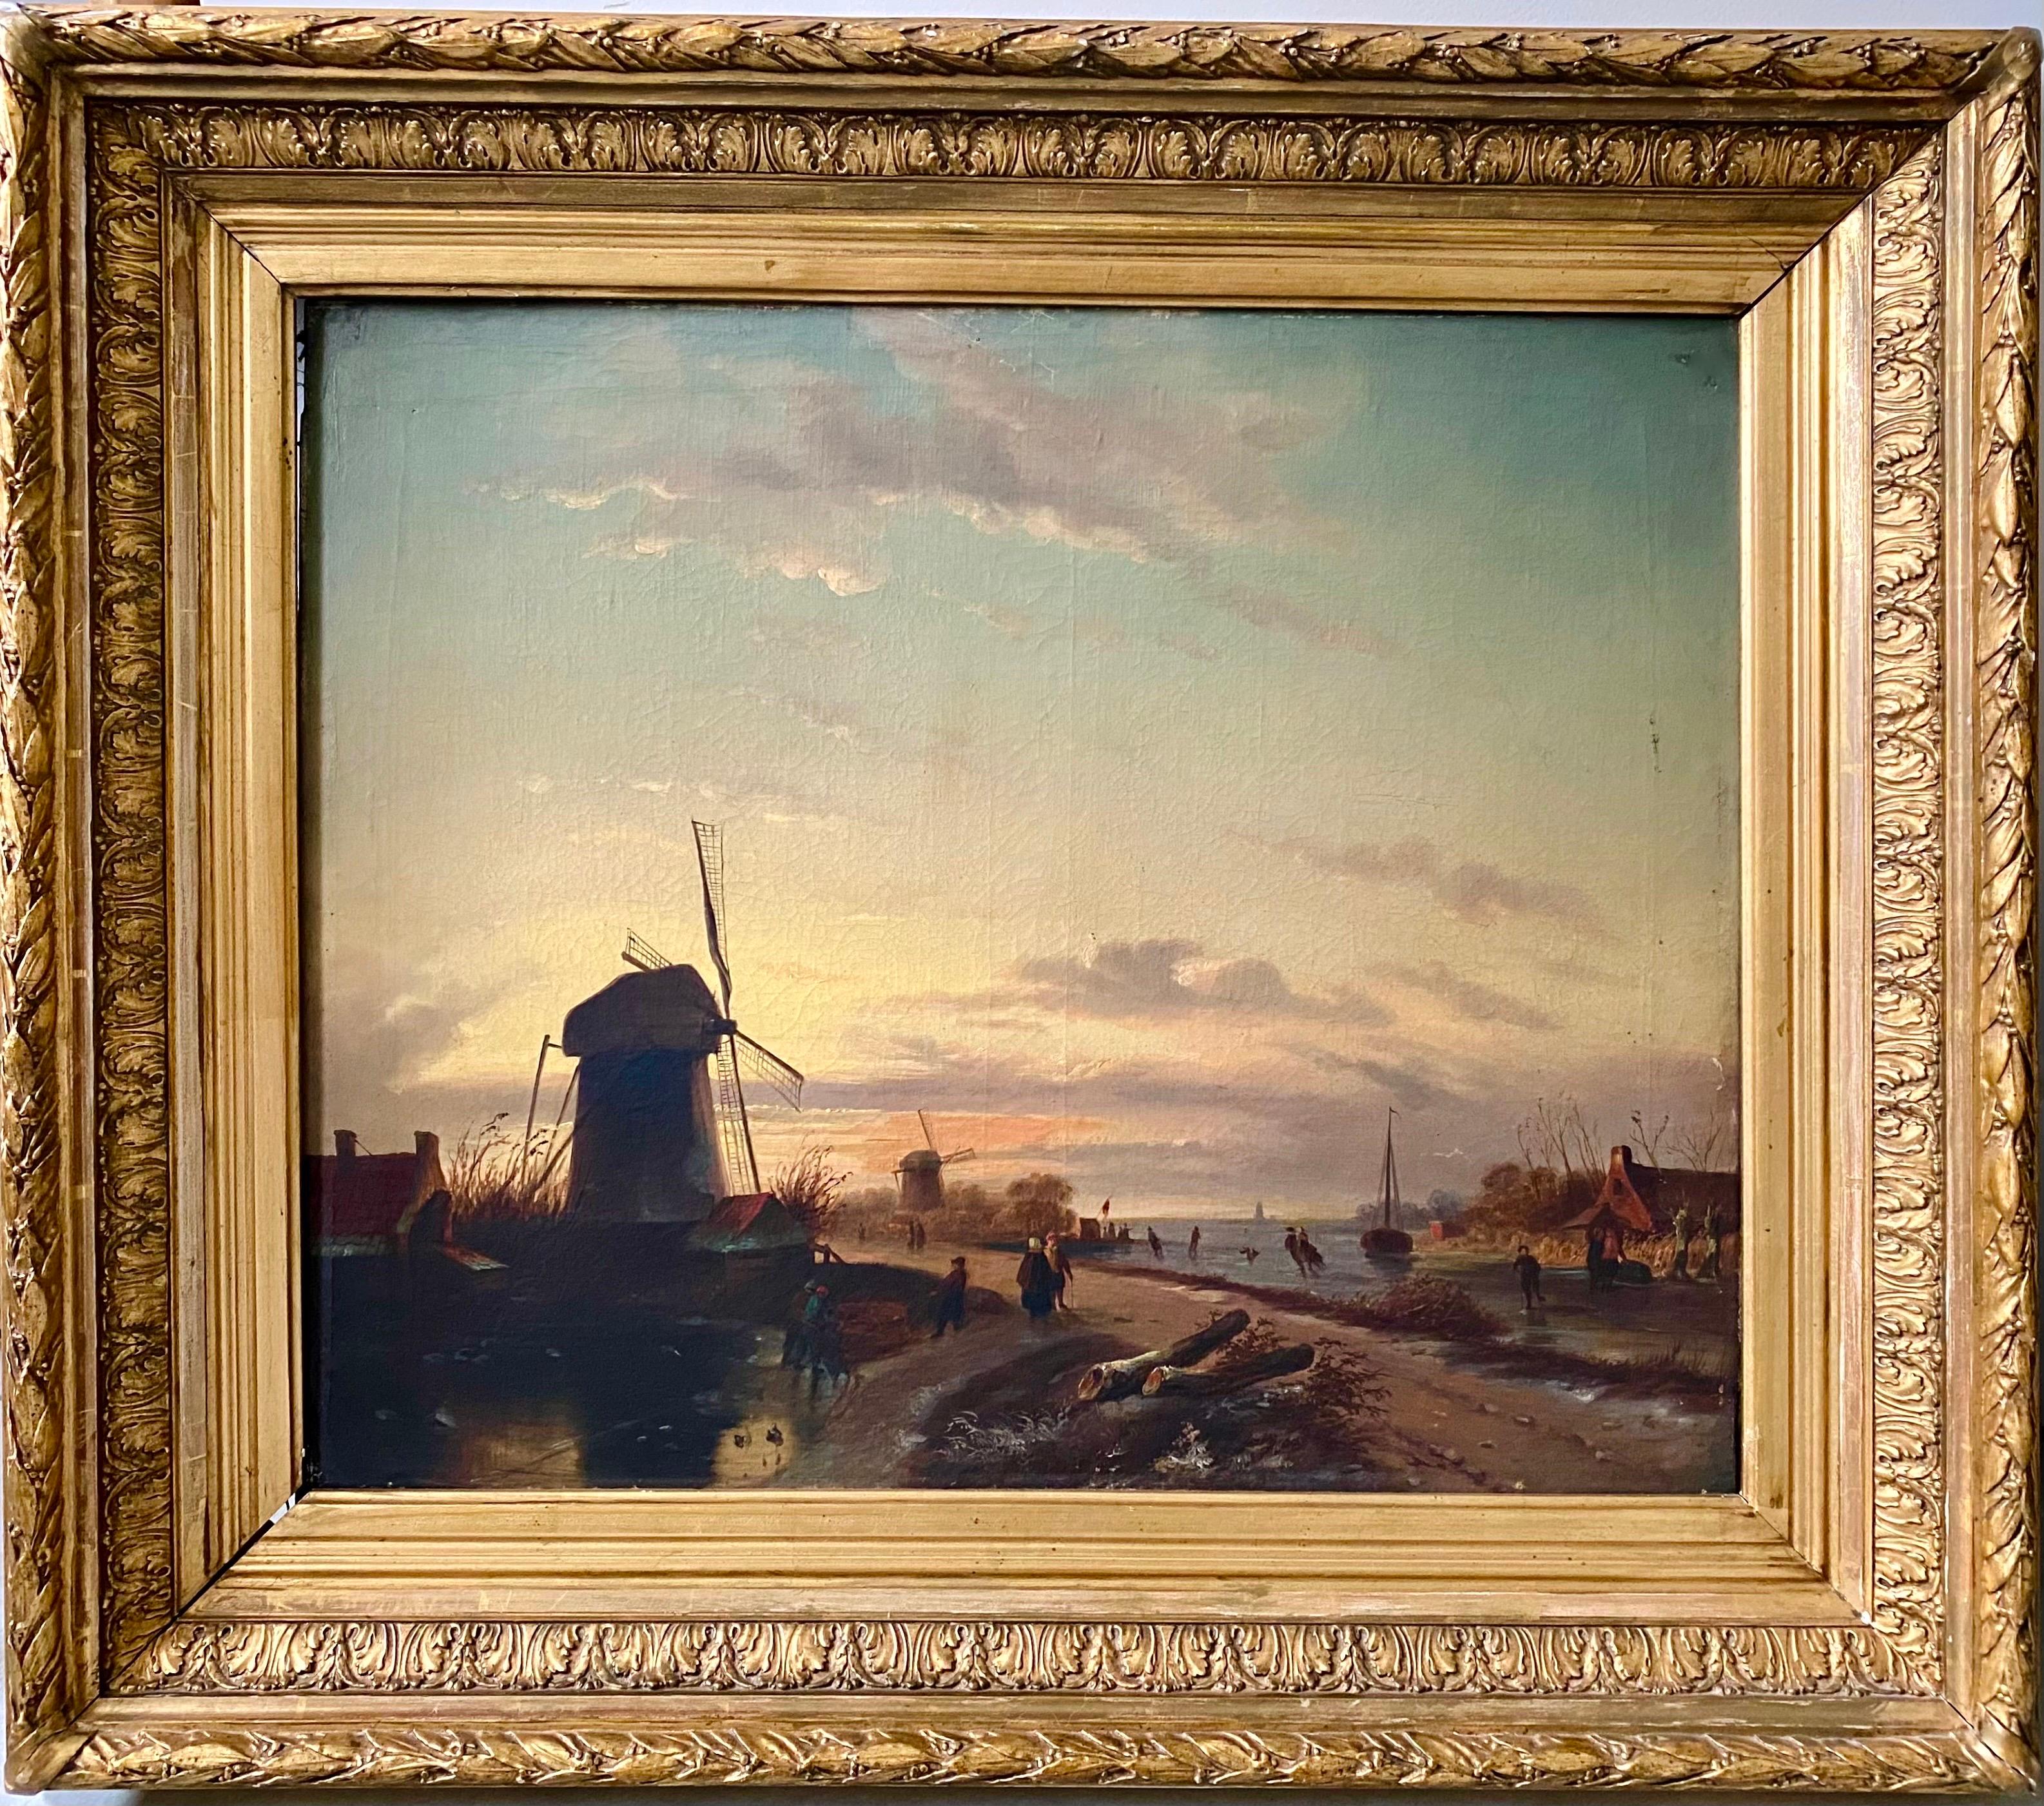 Unknown Figurative Painting - 19th century Dutch oil painting of a sunset over a winter Landscape - Figurative